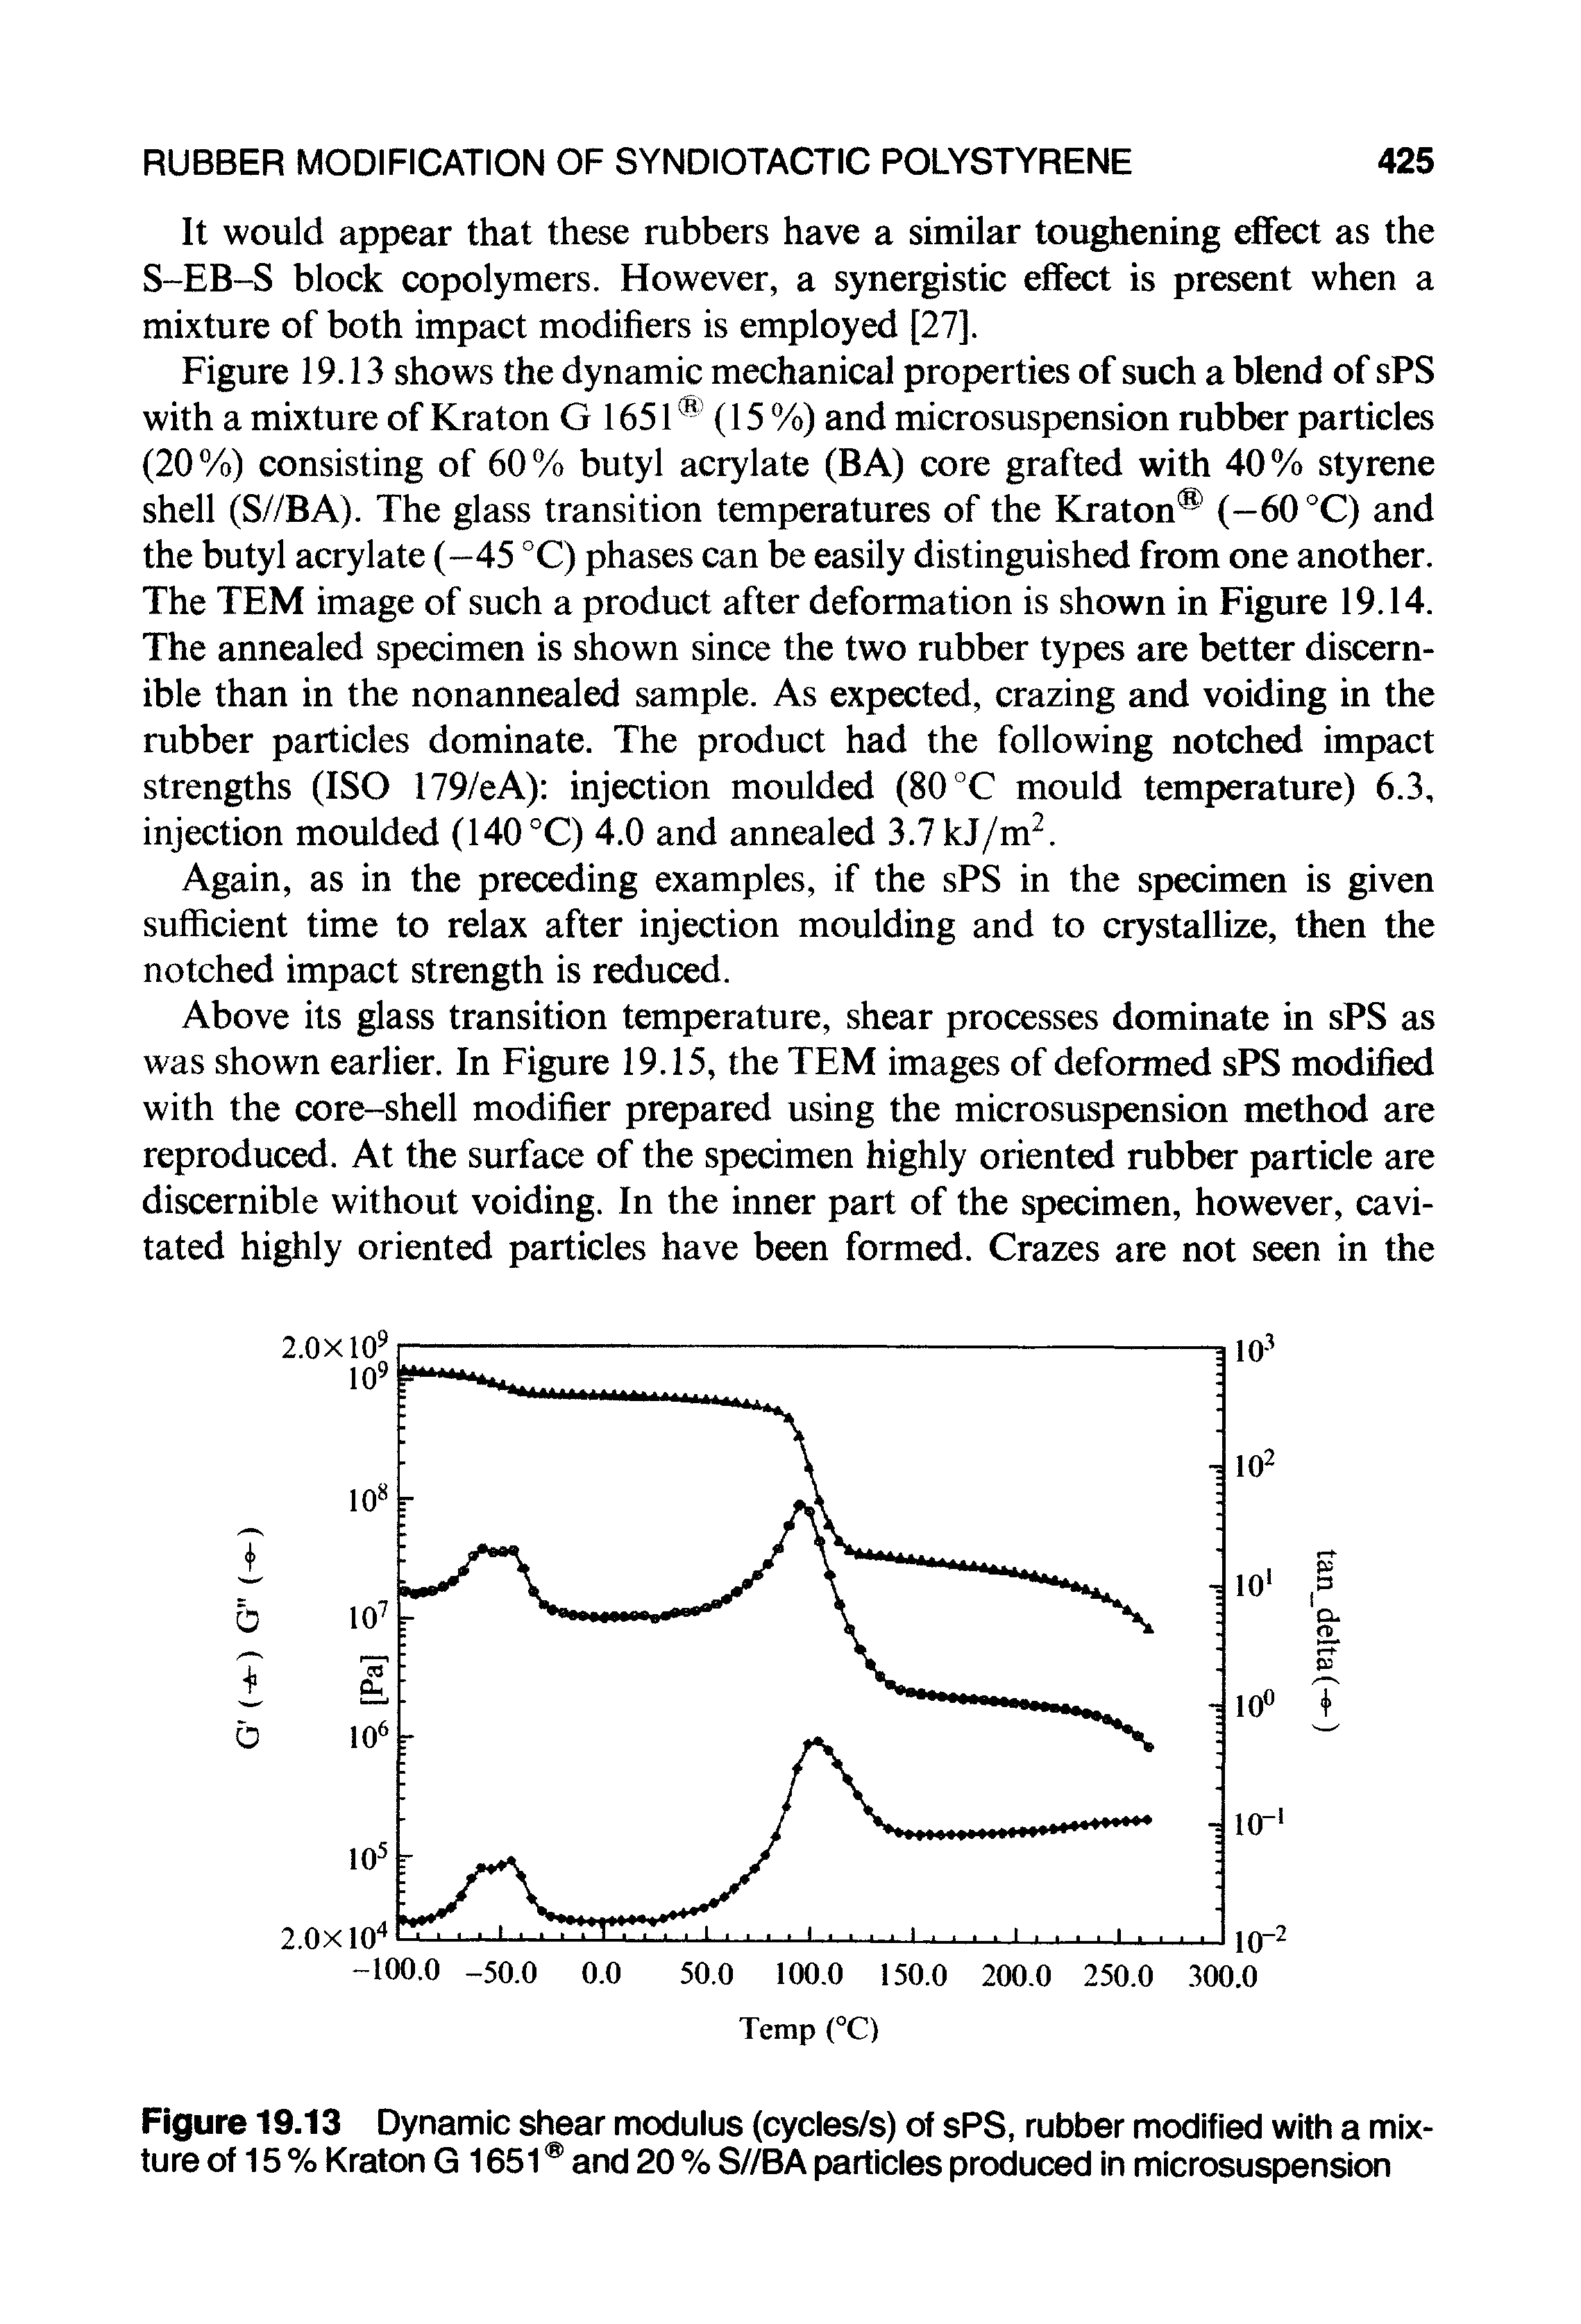 Figure 19.13 shows the dynamic mechanical properties of such a blend of sPS with a mixture of Kraton G 1651 (15 %) and microsuspension rubber particles (20%) consisting of 60% butyl acrylate (BA) core grafted with 40% styrene shell (S//BA). The glass transition temperatures of the Kraton (-60 °C) and the butyl acrylate (-45 °C) phases can be easily distinguished from one another. The TEM image of such a product after deformation is shown in Figure 19.14. The annealed specimen is shown since the two rubber types are better discernible than in the nonannealed sample. As expected, crazing and voiding in the rubber particles dominate. The product had the following notched impact strengths (ISO 179/eA) injection moulded (80 °C mould temperature) 6.3, injection moulded (140 °C) 4.0 and annealed 3.7kJ/m2.